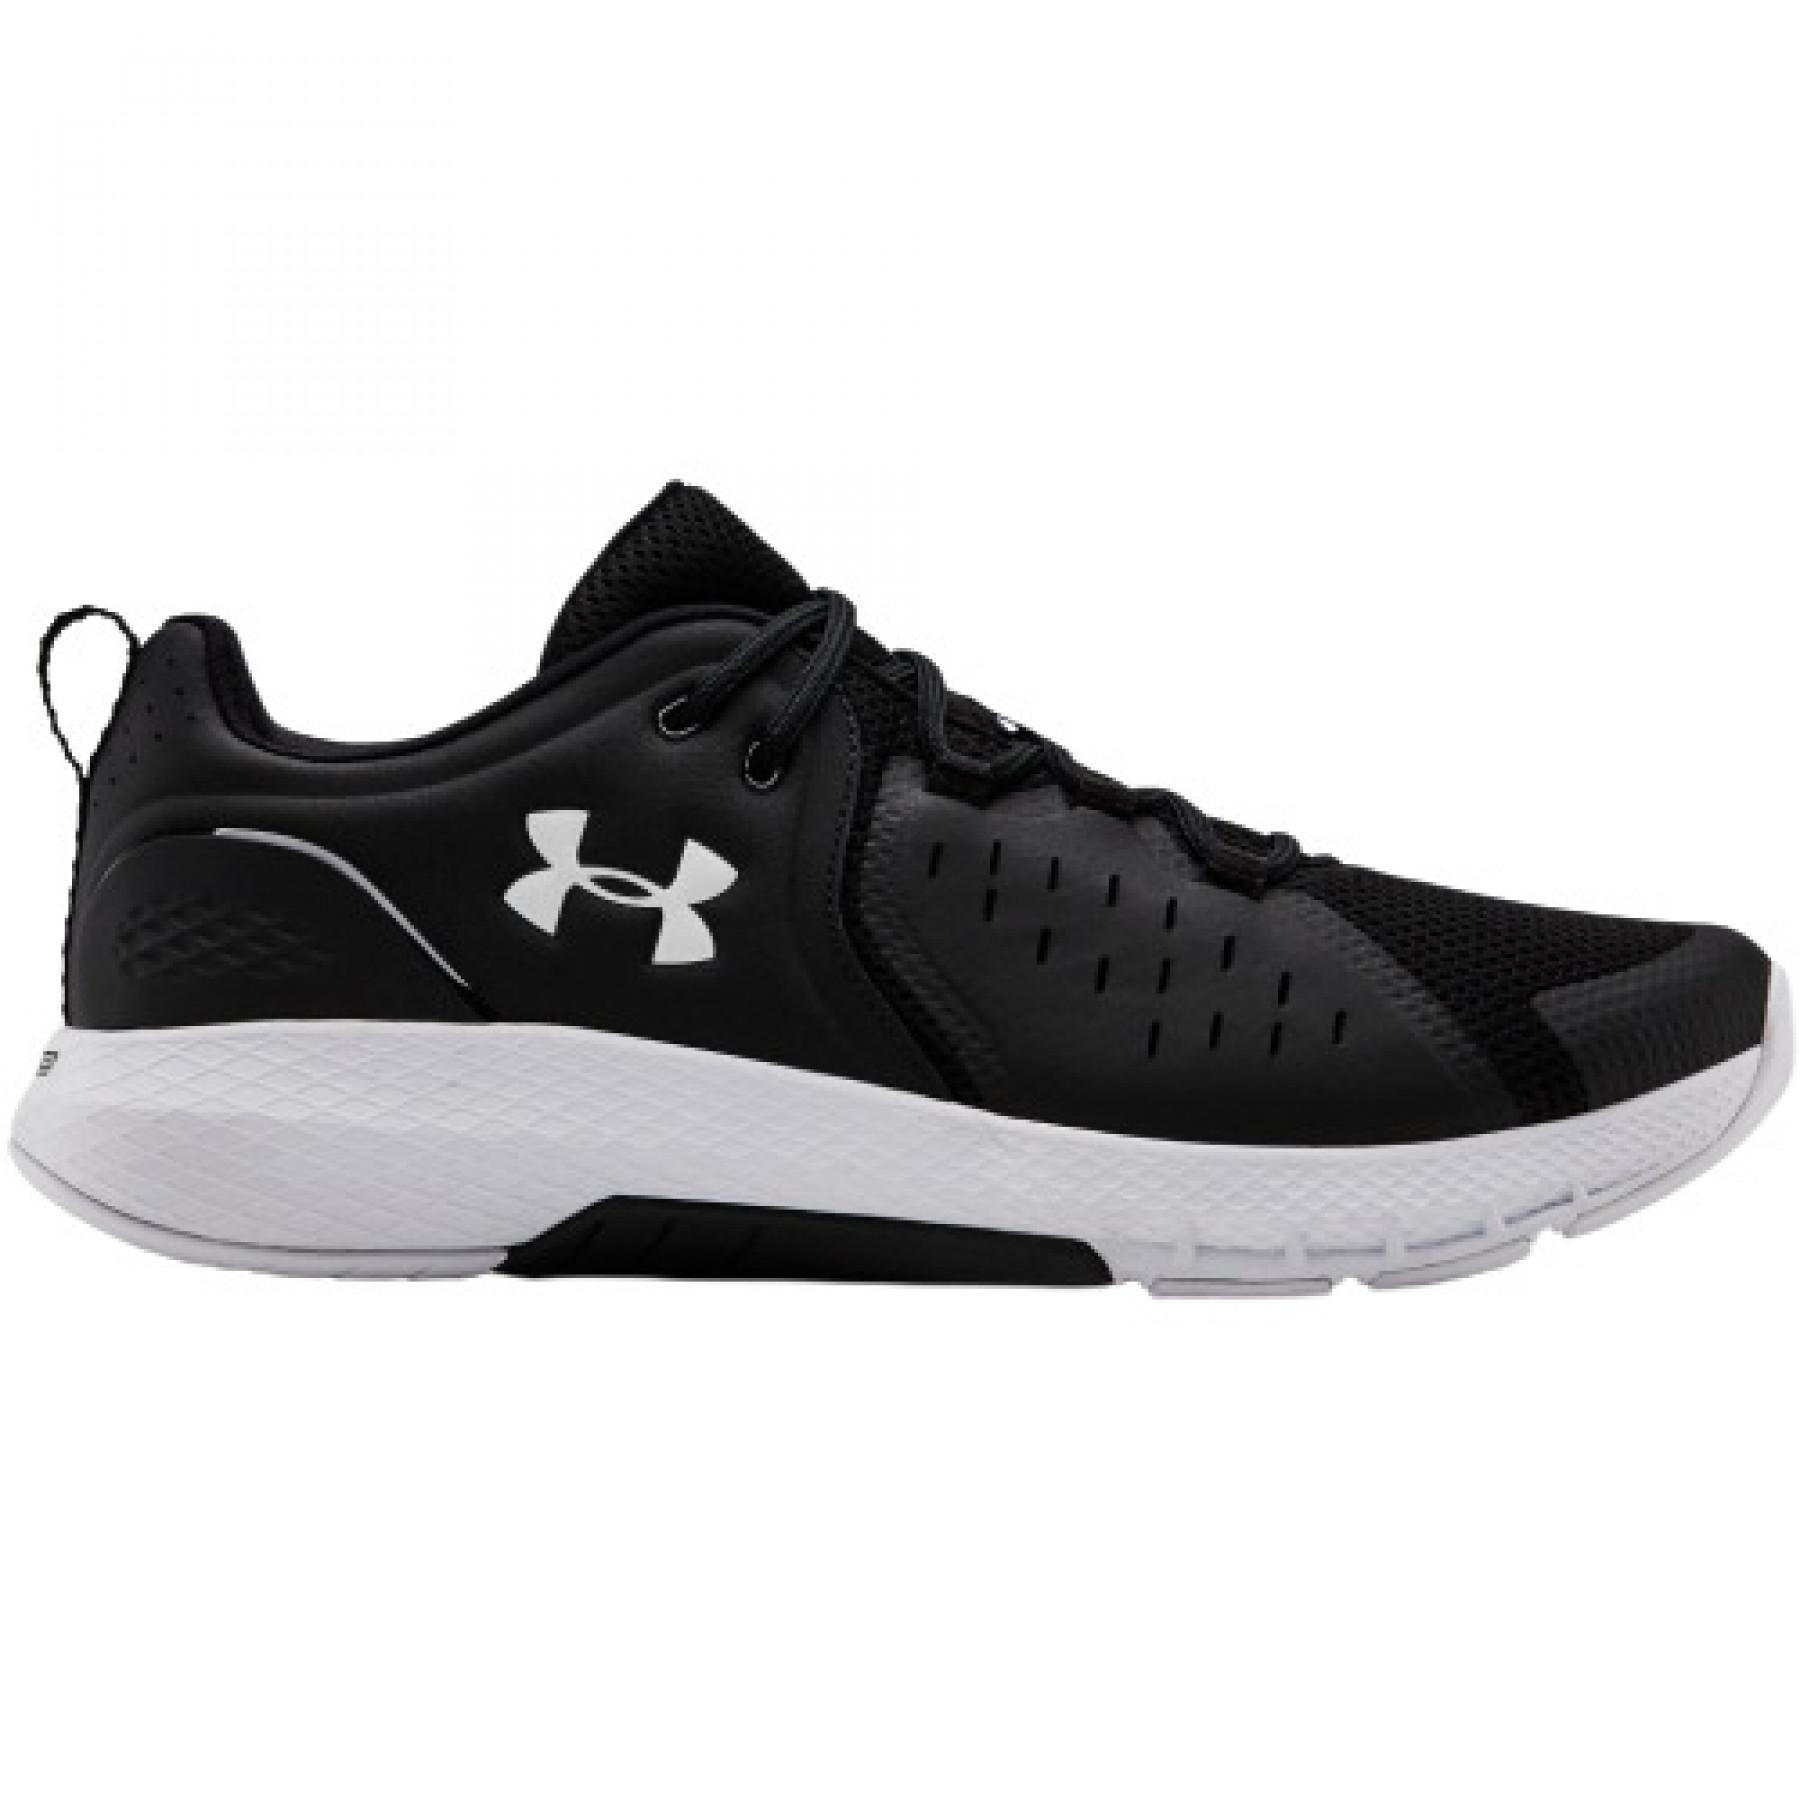 Zapatos Under Armour Charged Commit 2